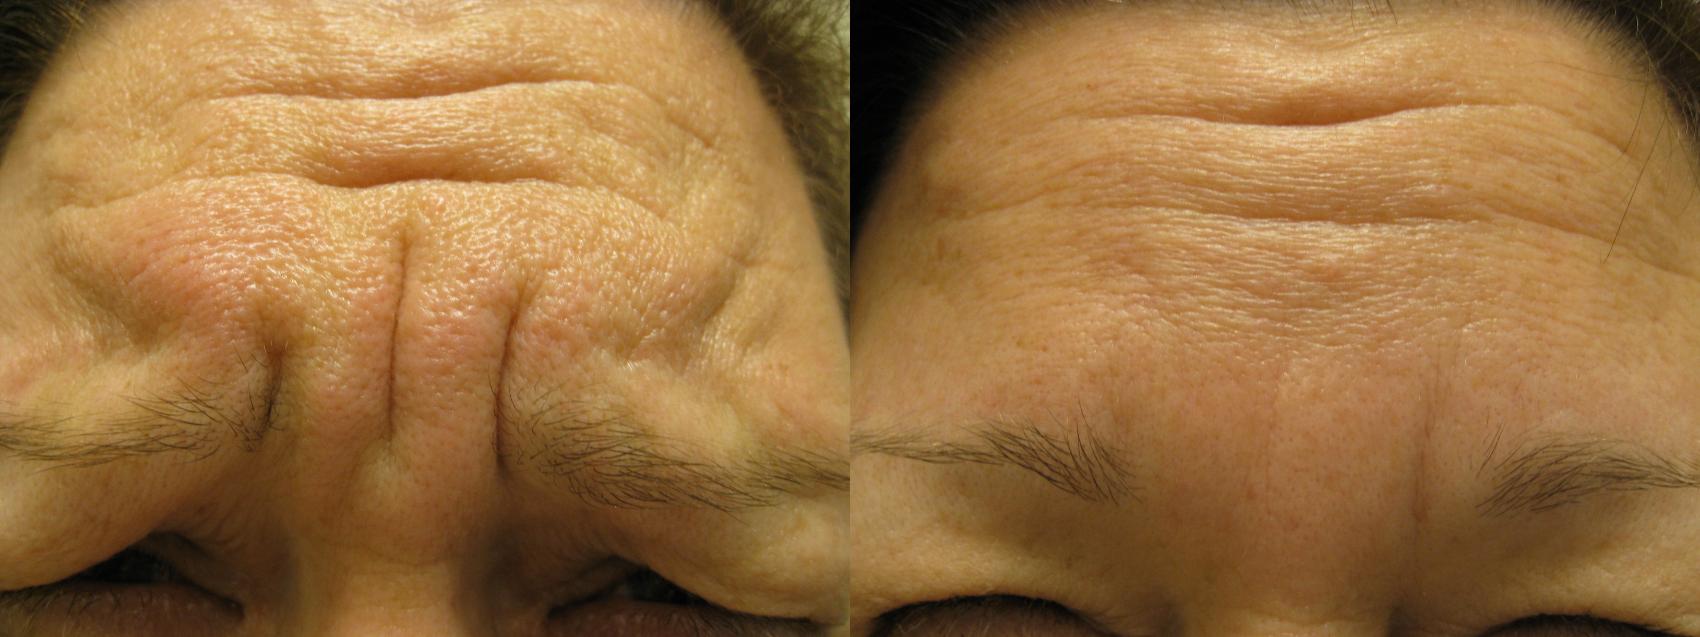 BOTOX® Cosmetic and Dysport® Before & After Photo | San Francisco, CA | Kaiser Permanente Cosmetic Services